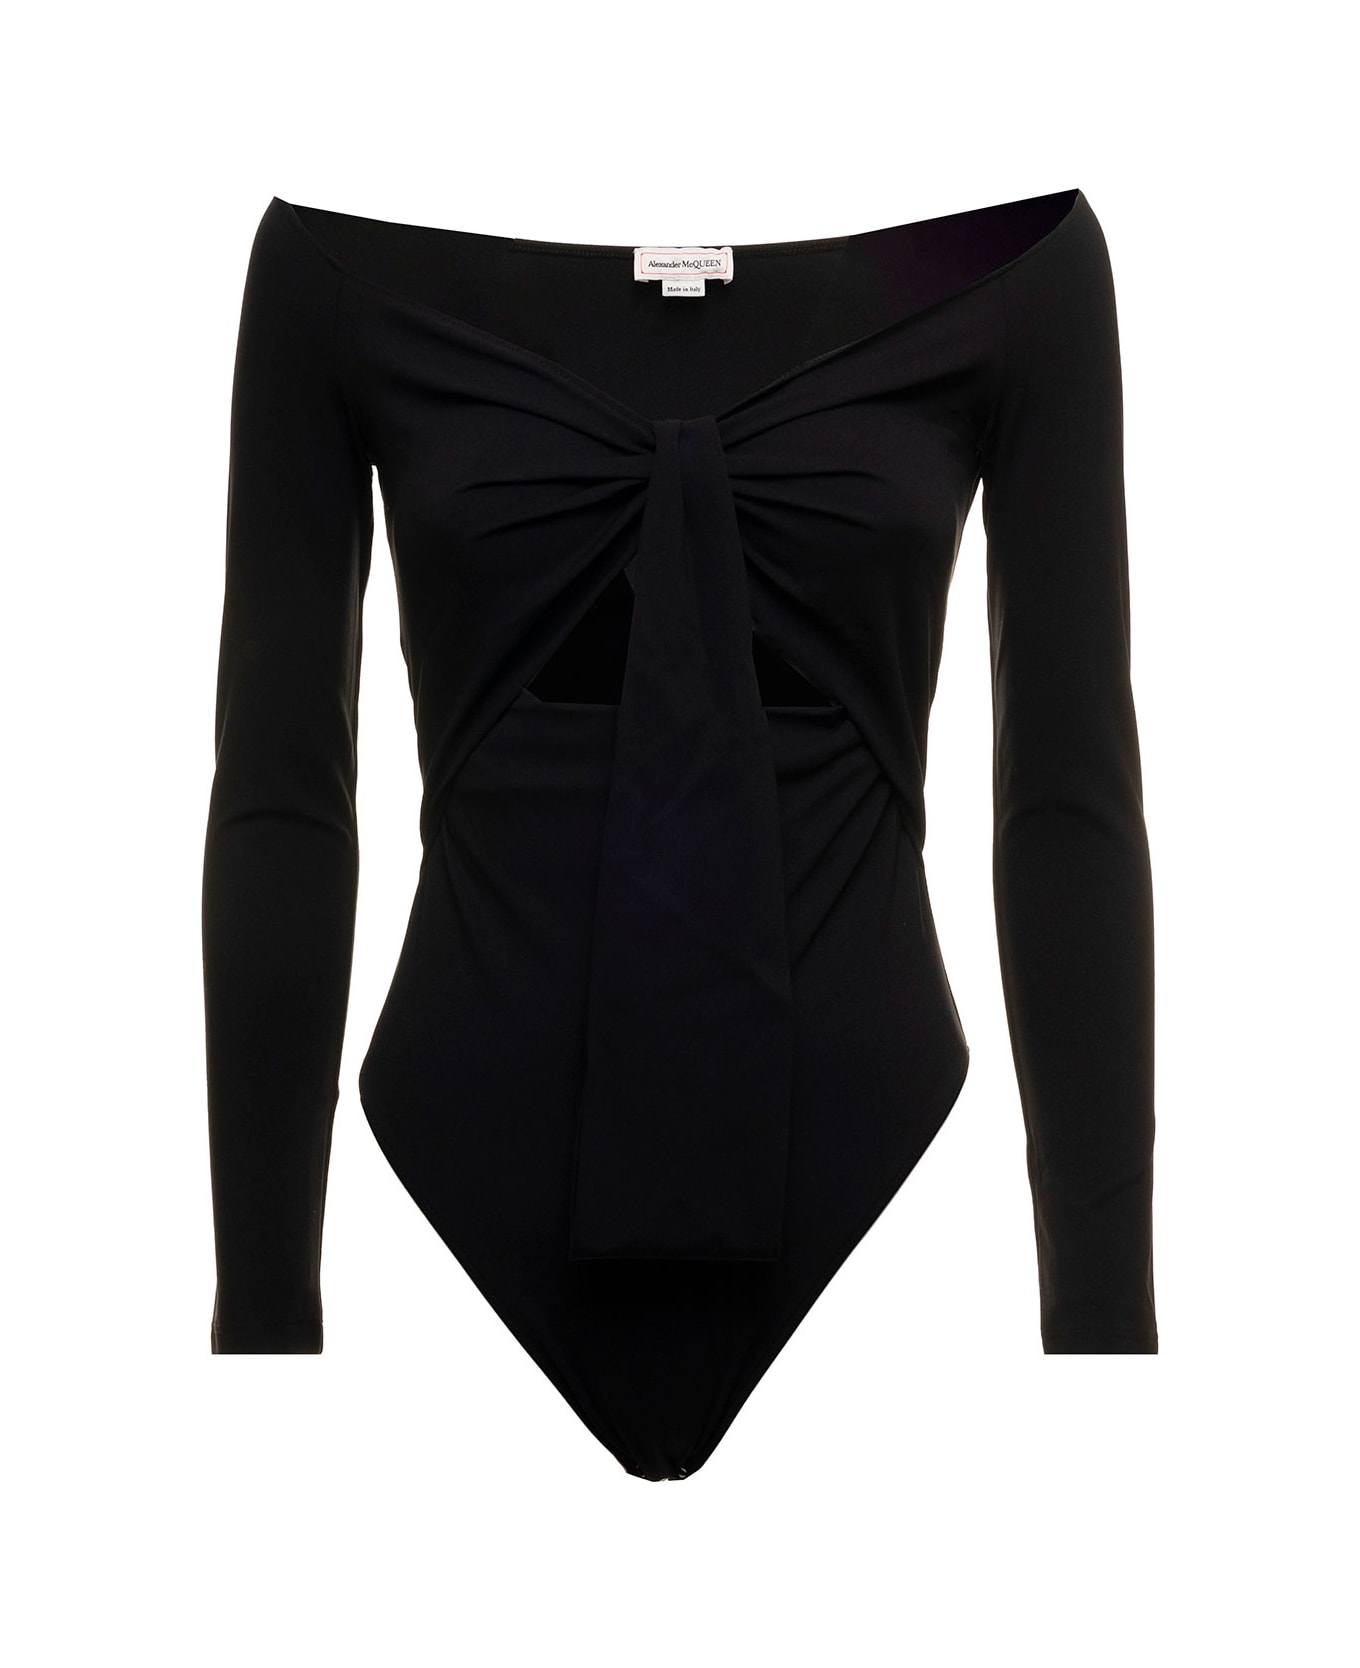 Alexander McQueen Stretch Fabric Body With Cut Out Inserts - Black